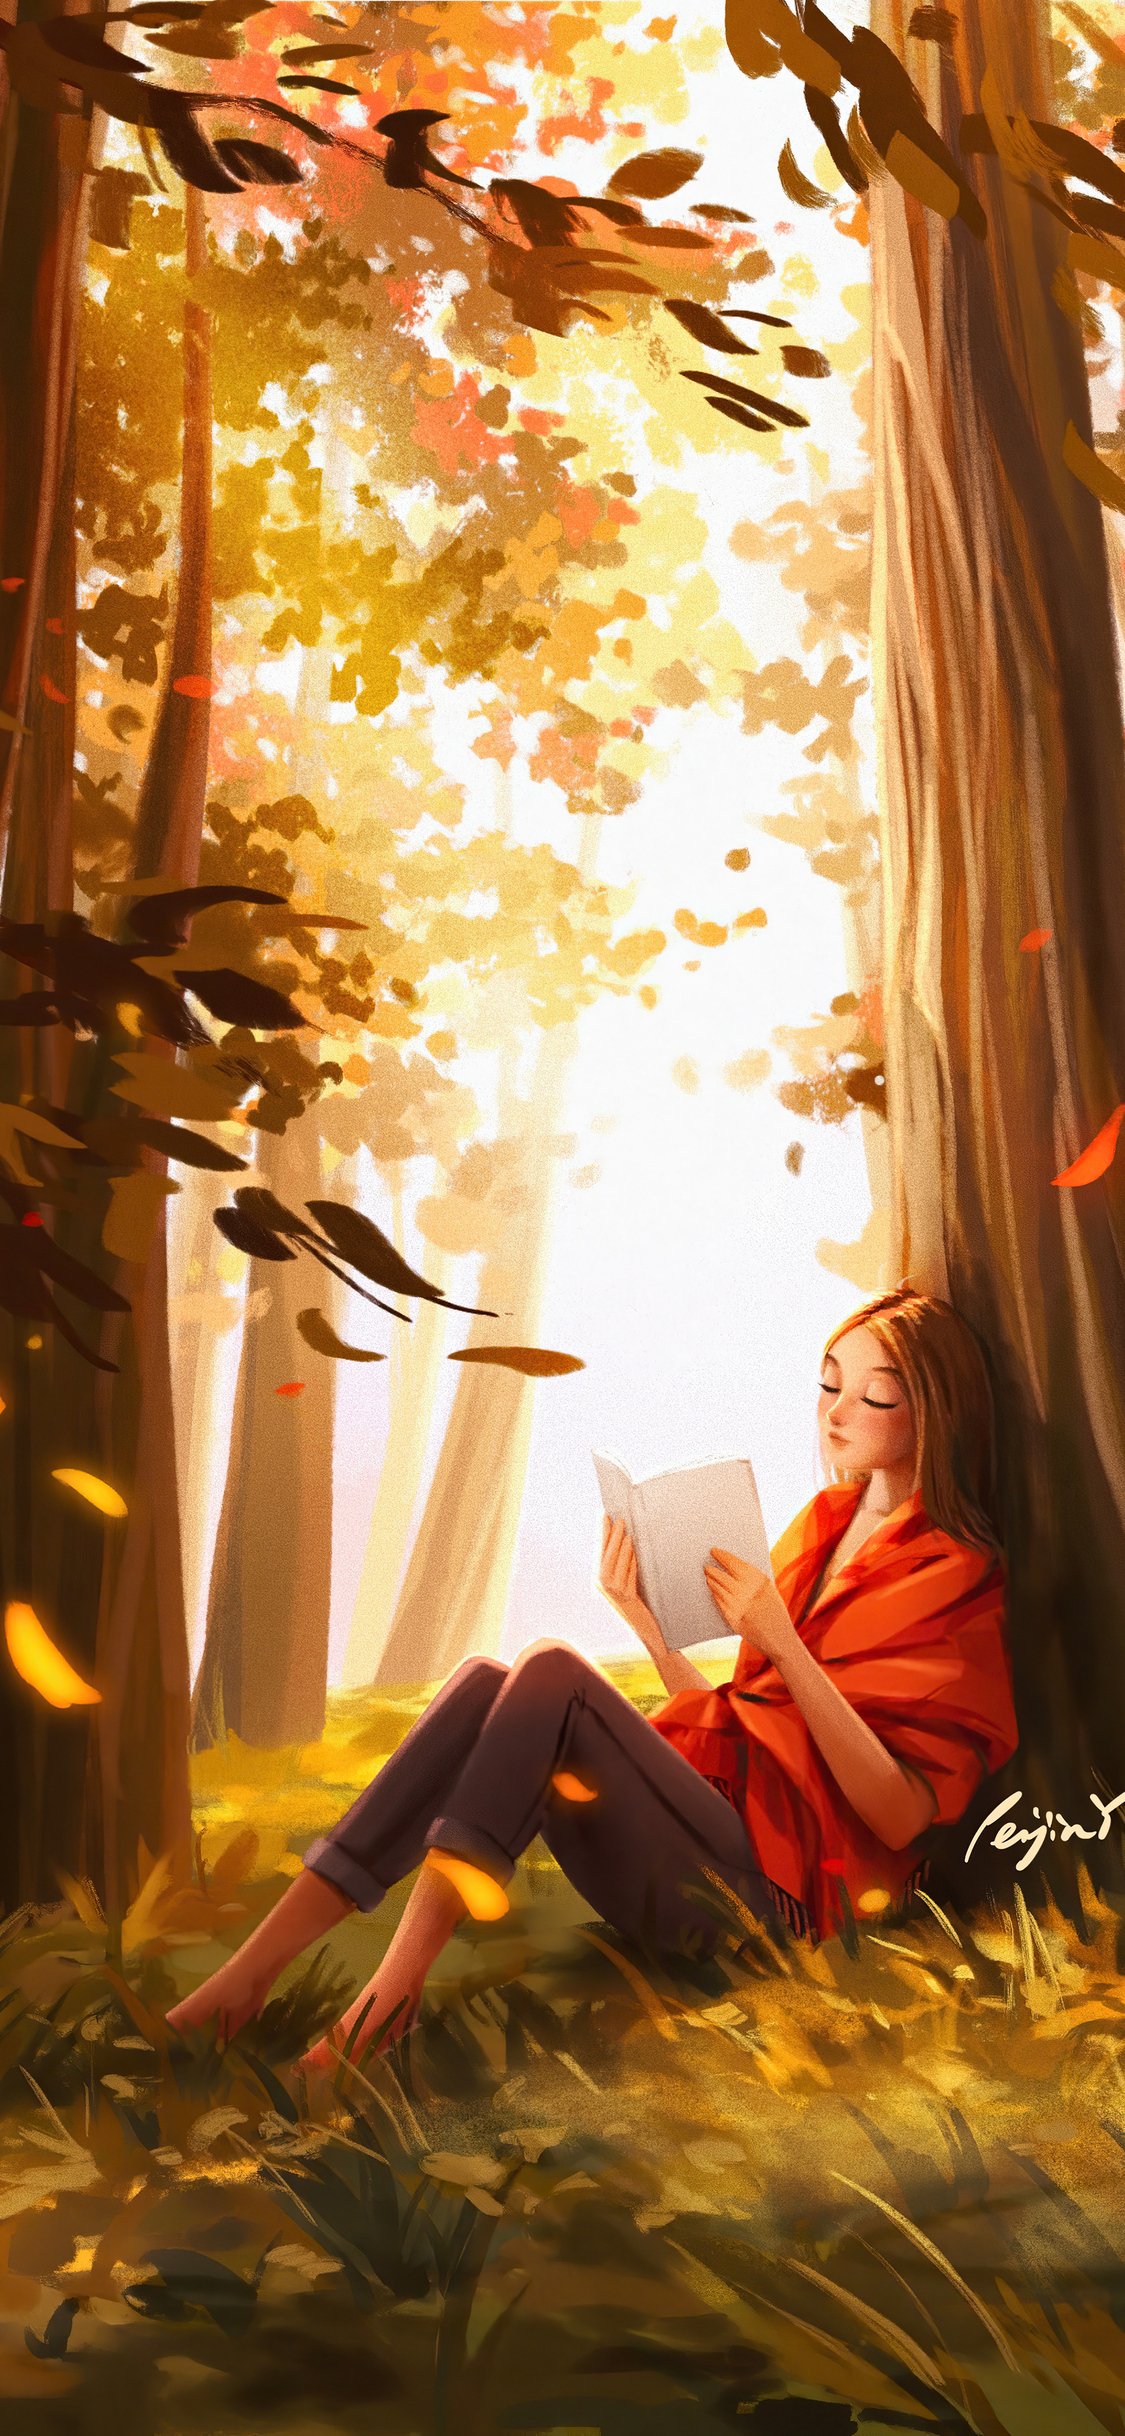 20 Reading HD Wallpapers and Backgrounds